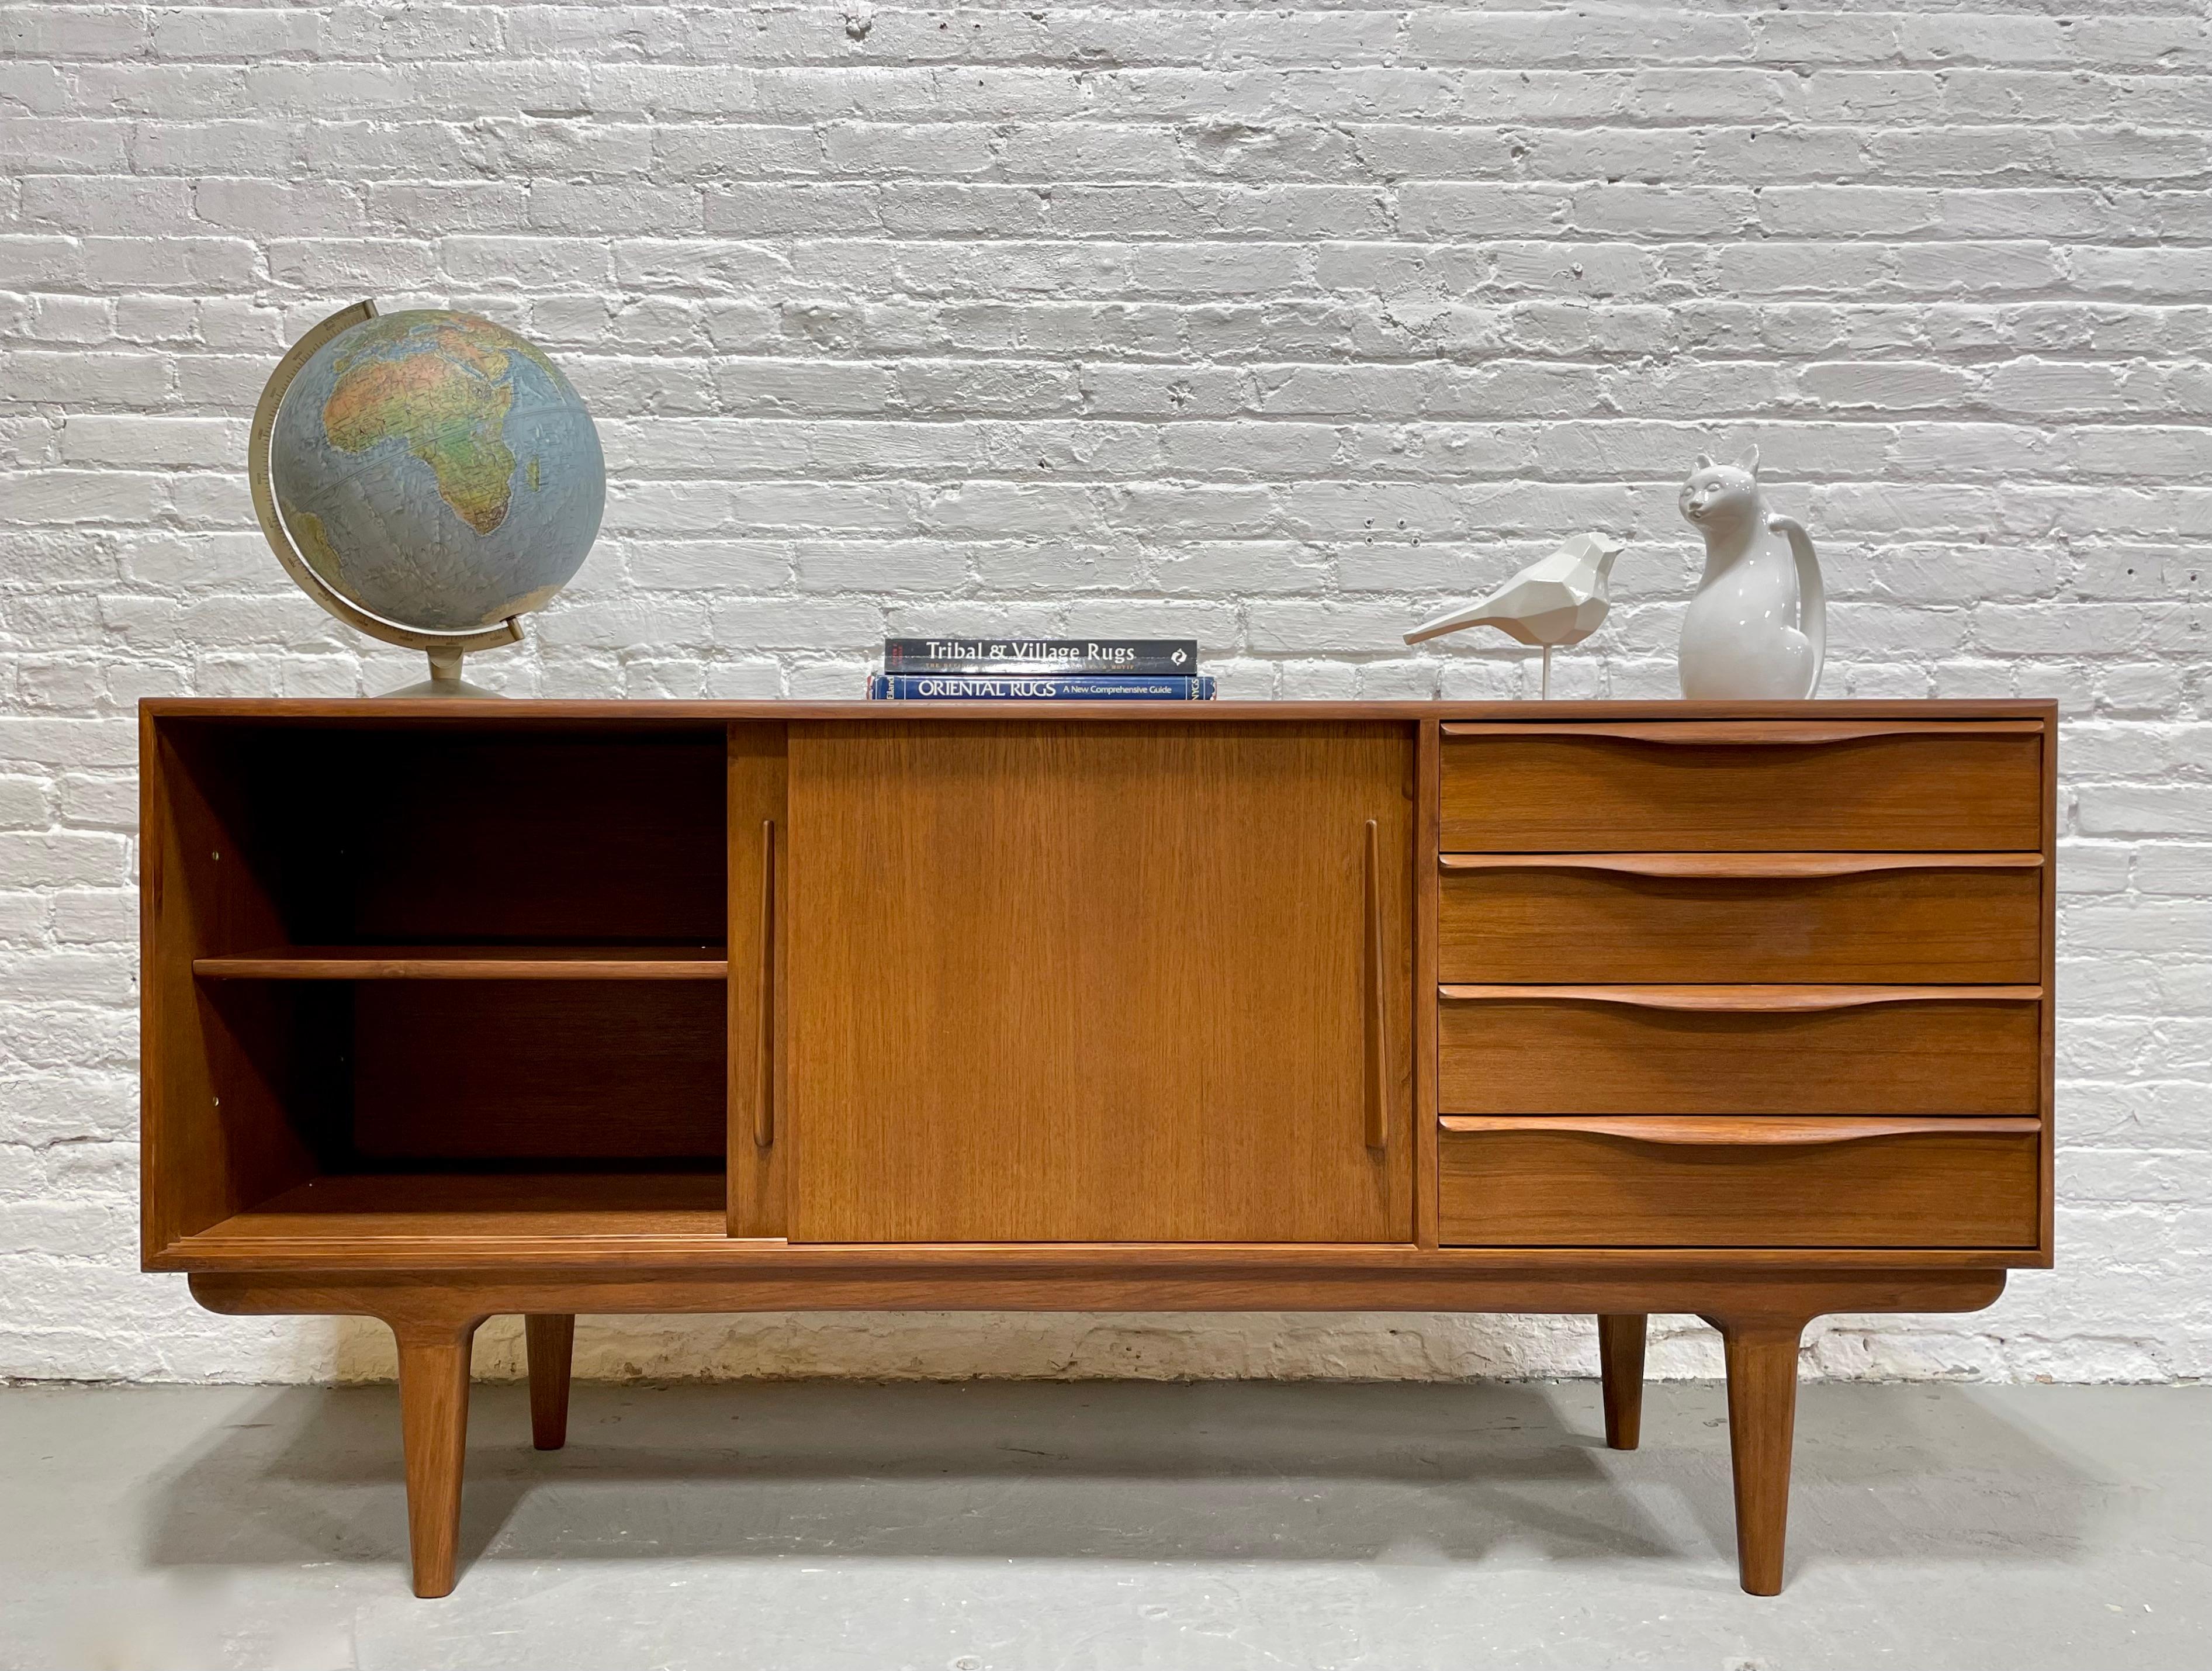 Contemporary Sculptural Mid-Century Modern Styled Credenza / Media Stand / Sideboard For Sale